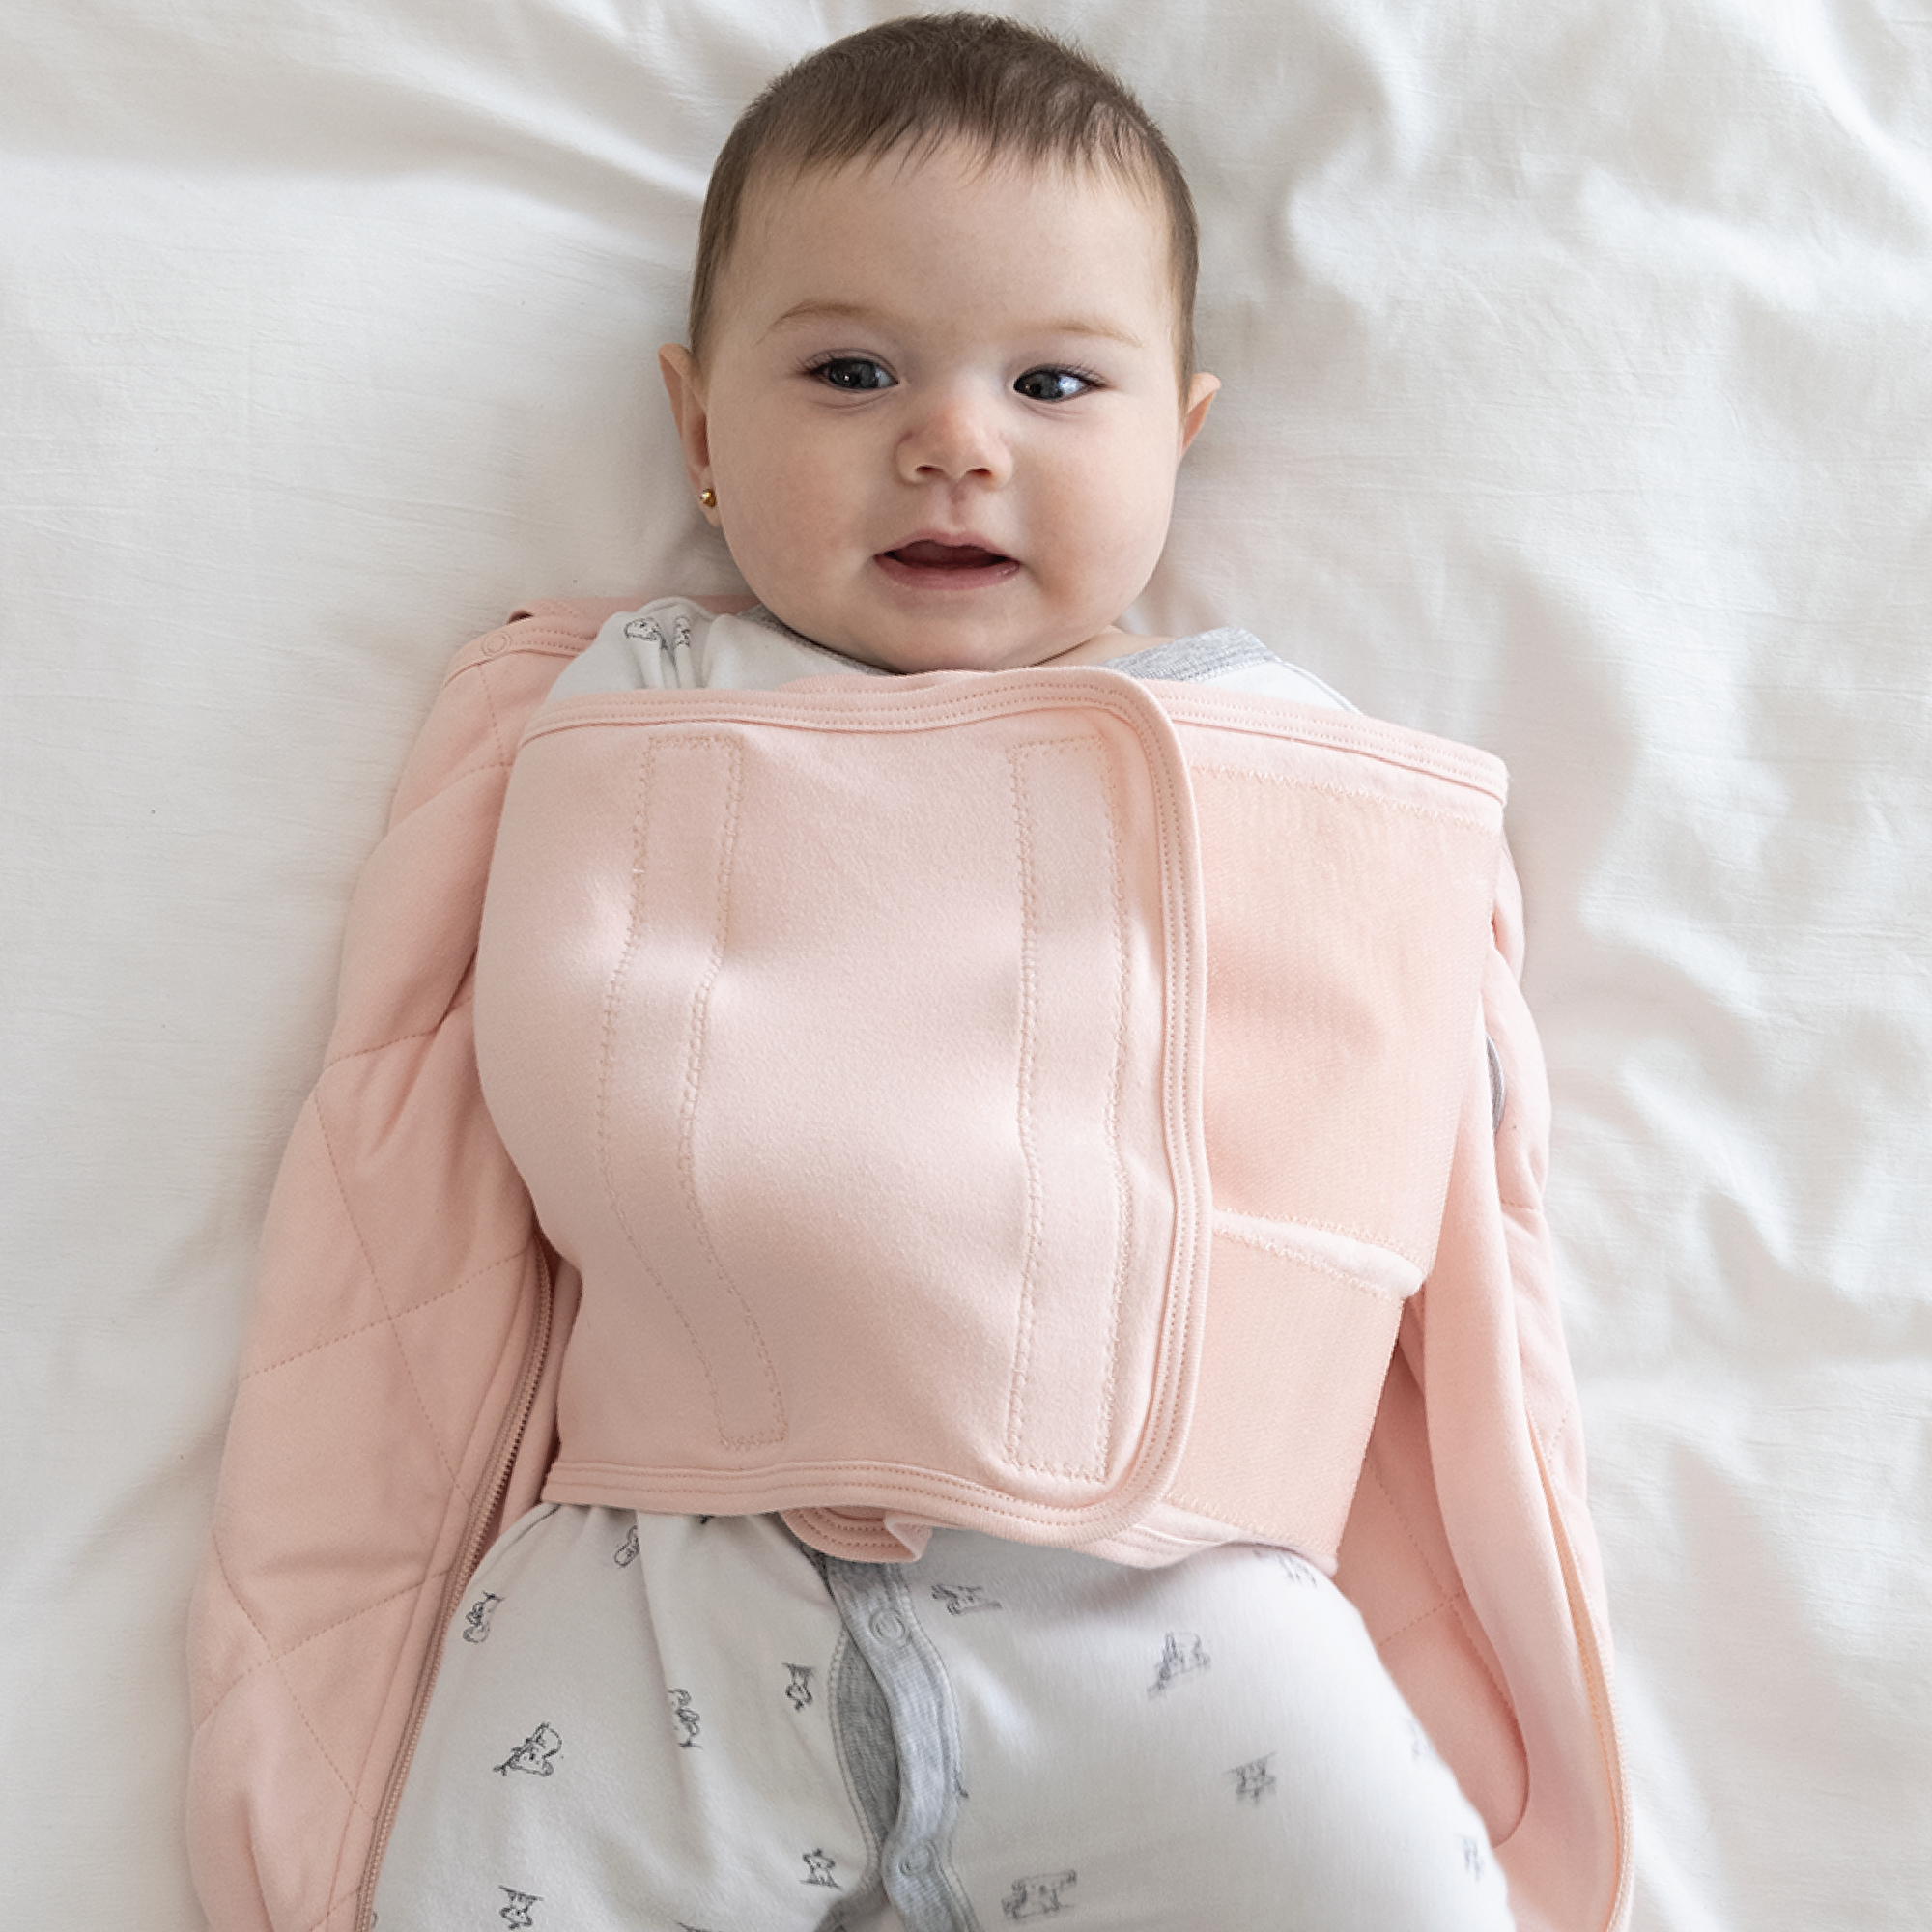 Are Weighted Swaddles Safe For Infants?